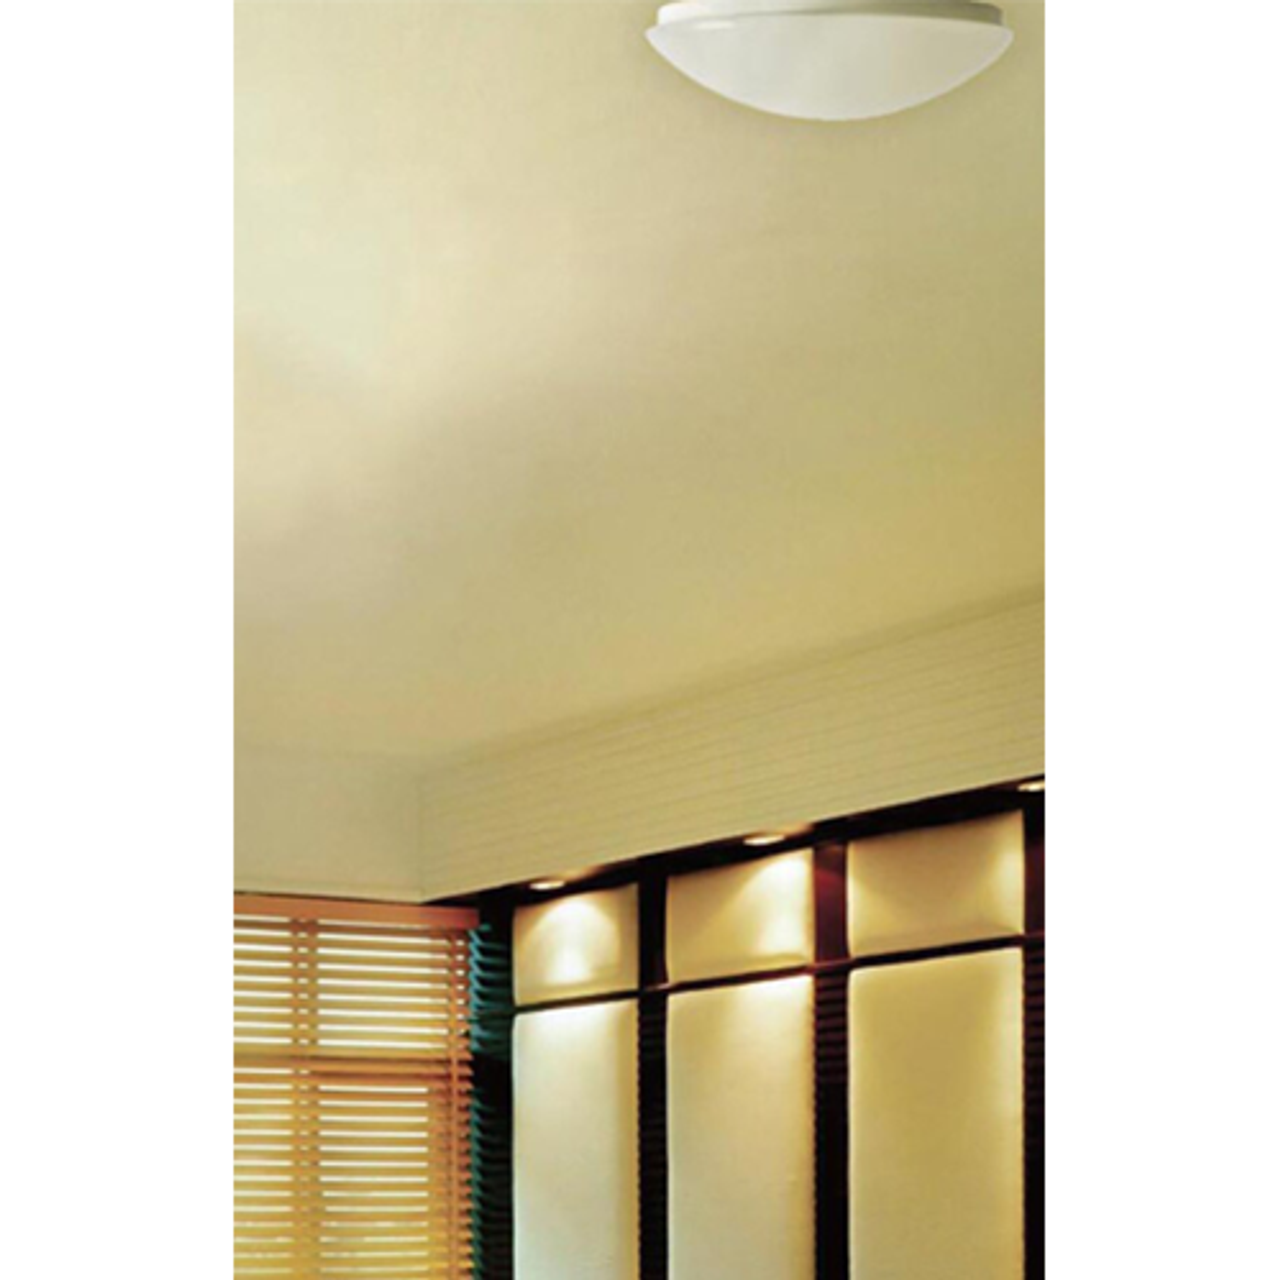 10" LED Flush Mounted Ceiling Light, Prefect for Offices and Hotels.